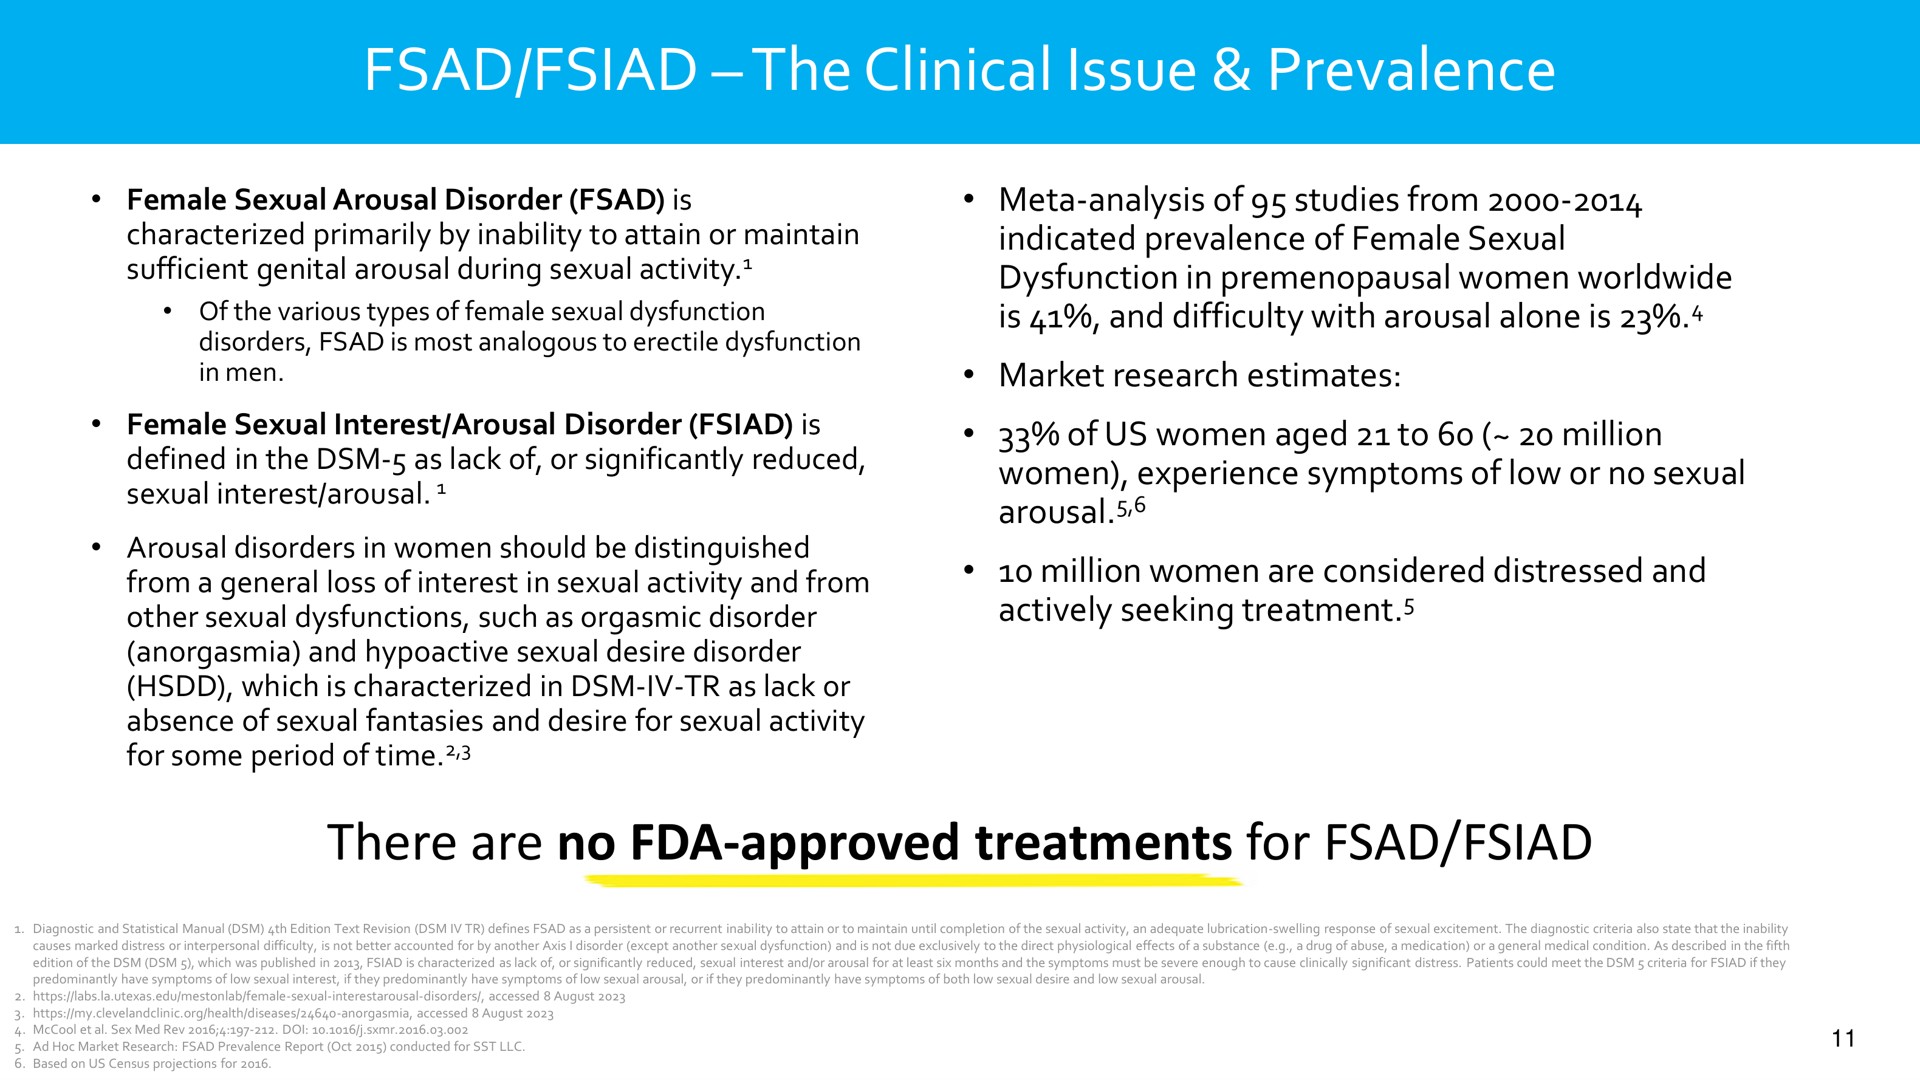 the clinical issue prevalence there are no approved treatments for | Dare Bioscience